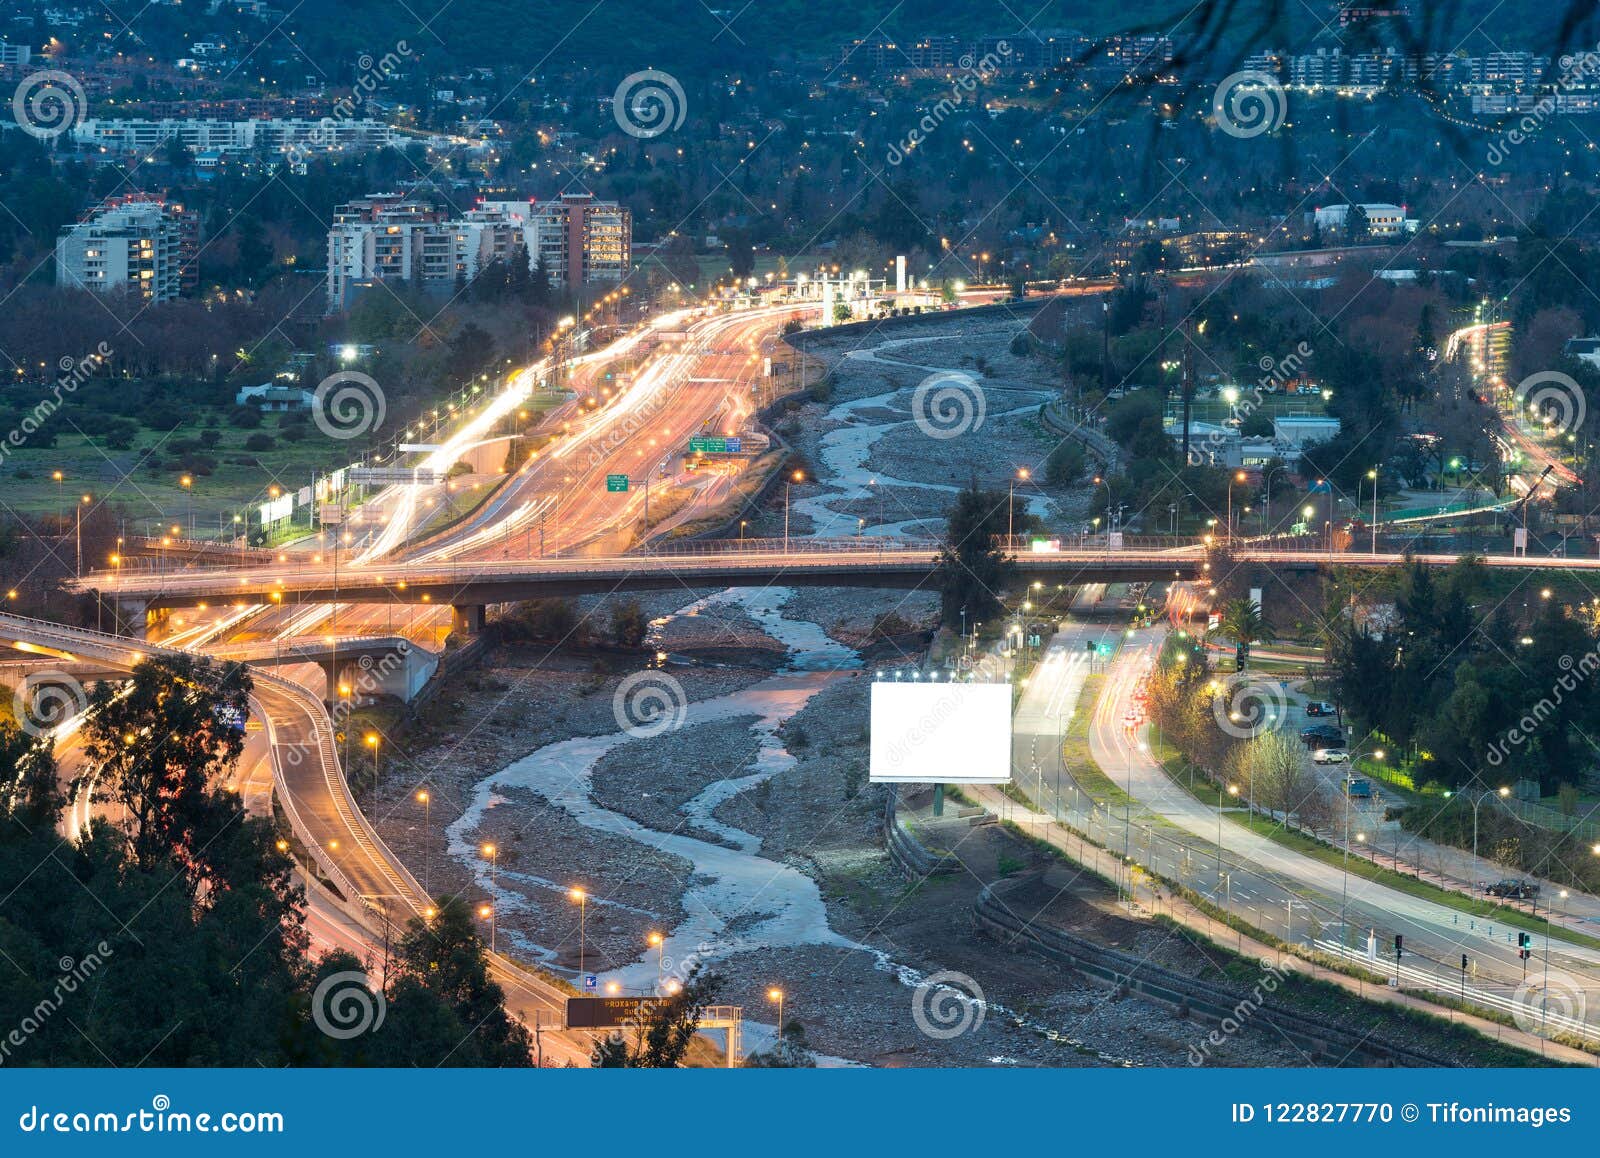 mapocho river and costanera norte highway in the wealthy district of vitacura in santiago